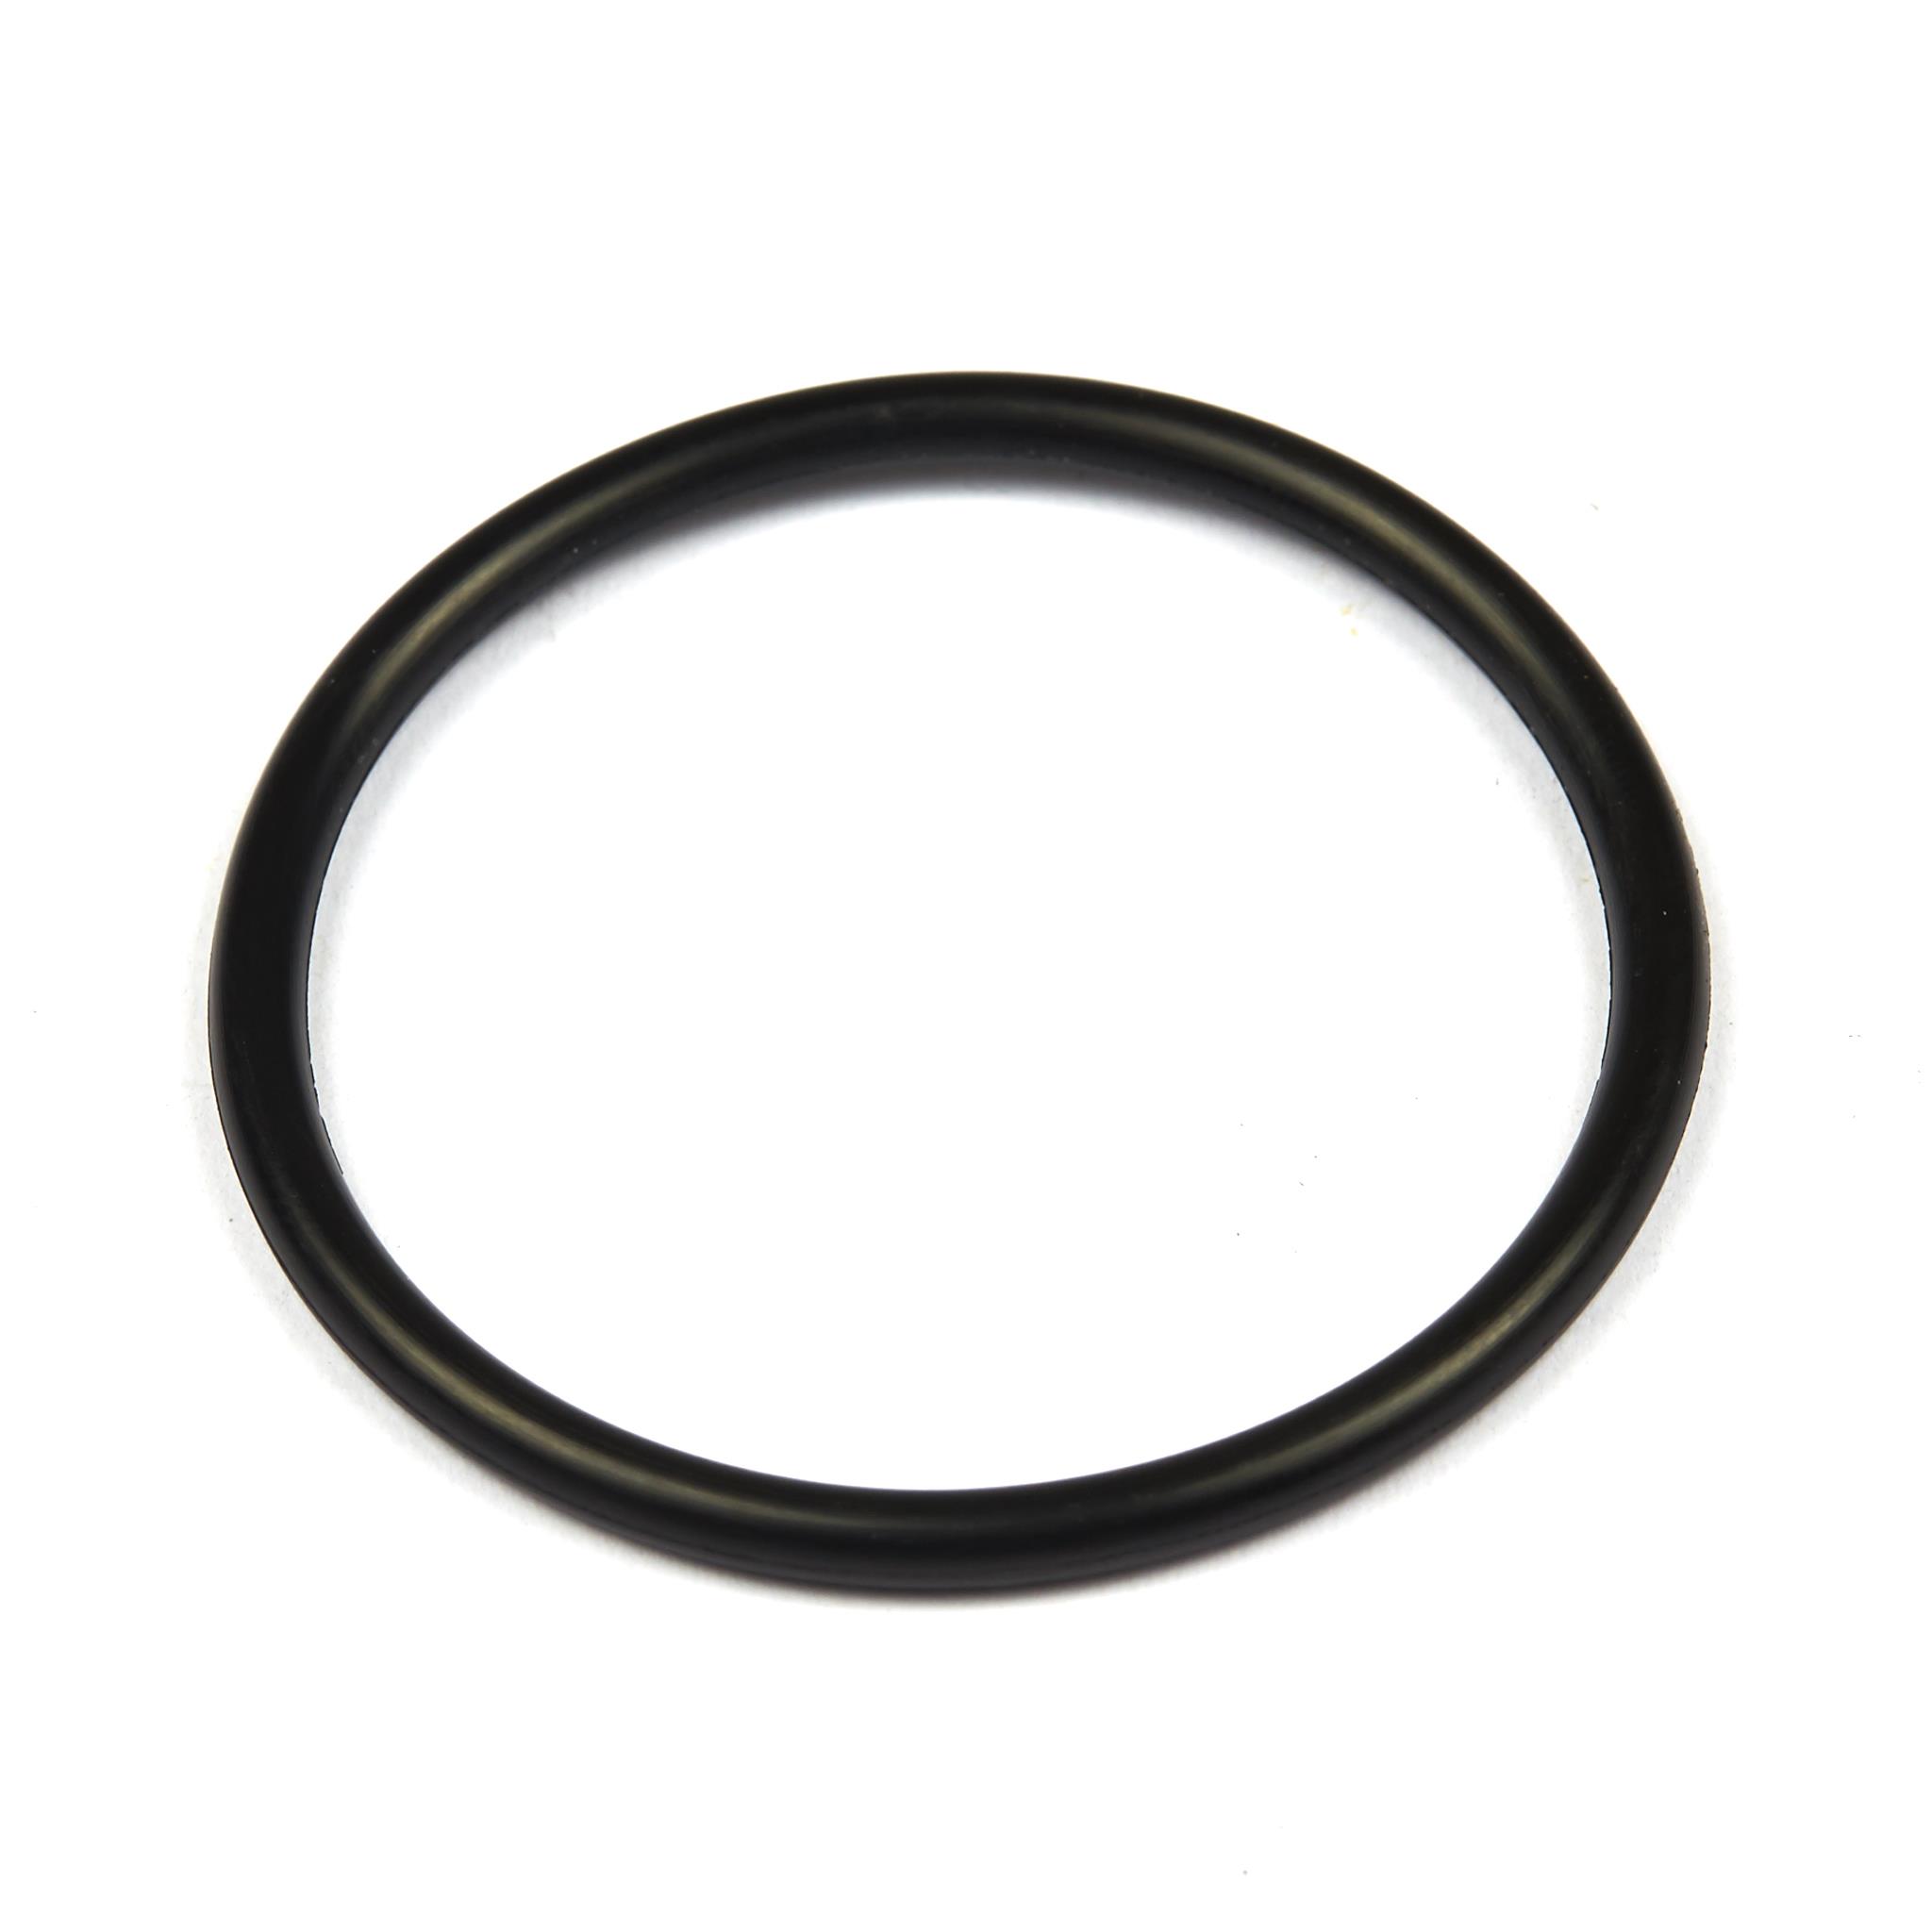 SEAL O RING part# 690589 by Briggs & Stratton